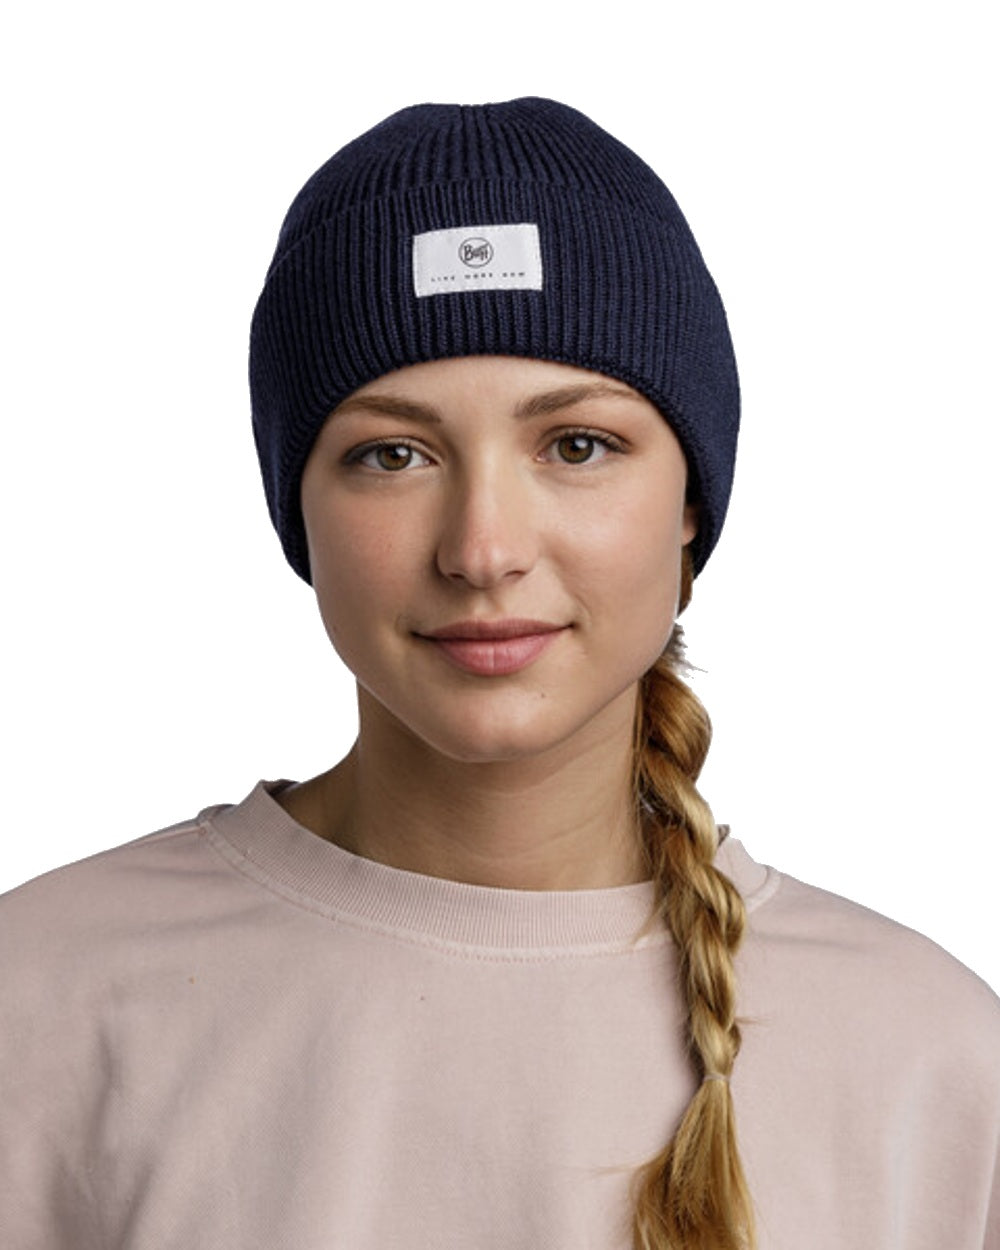 Buff Drisk Knitted Beanie in Night Blue 